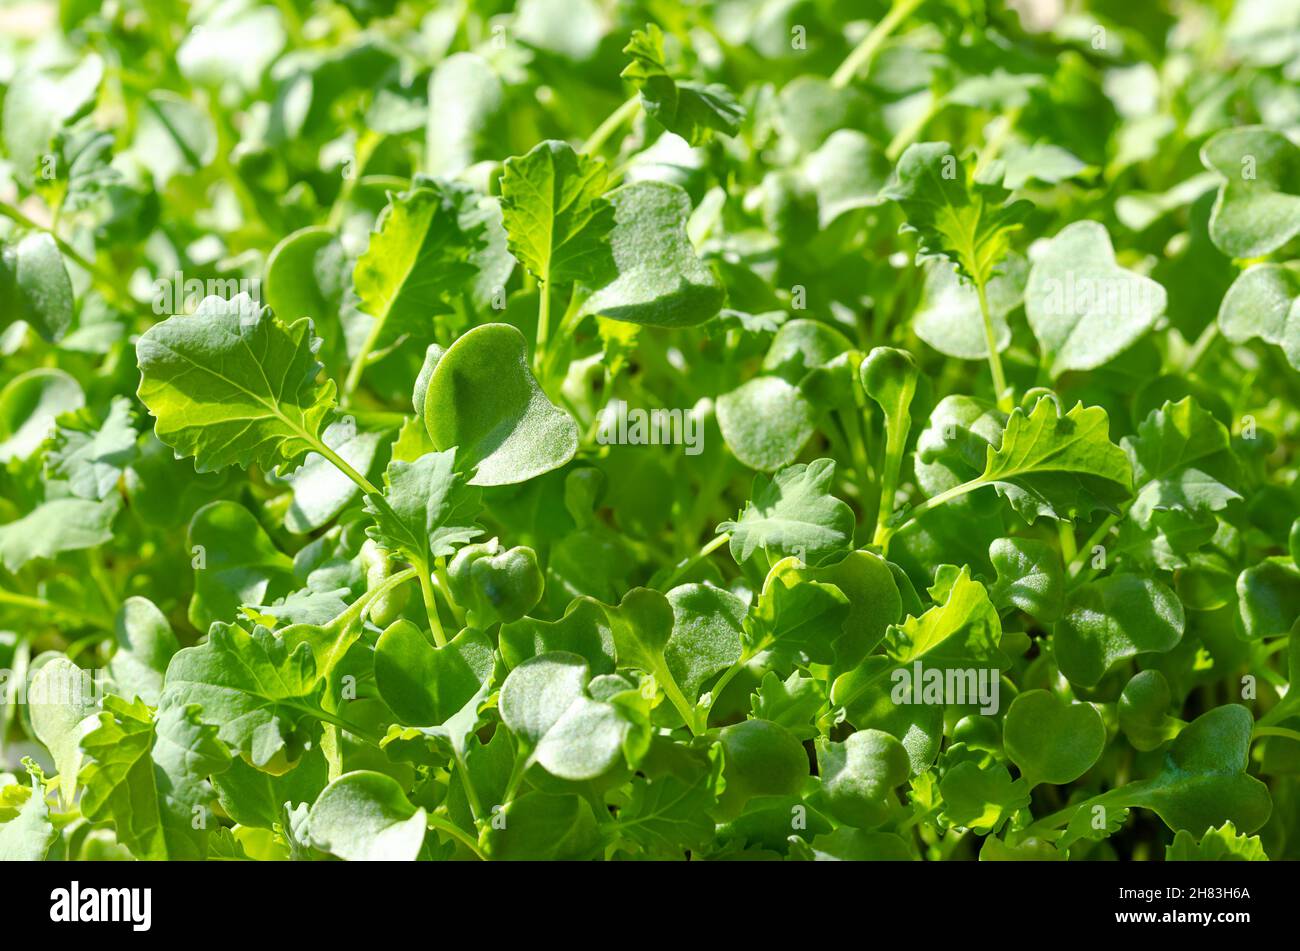 Kale microgreens, from above, close up. Fresh seedlings, and growing green shoots of leaf cabbage, Brassica oleracea var. sabellica. Stock Photo